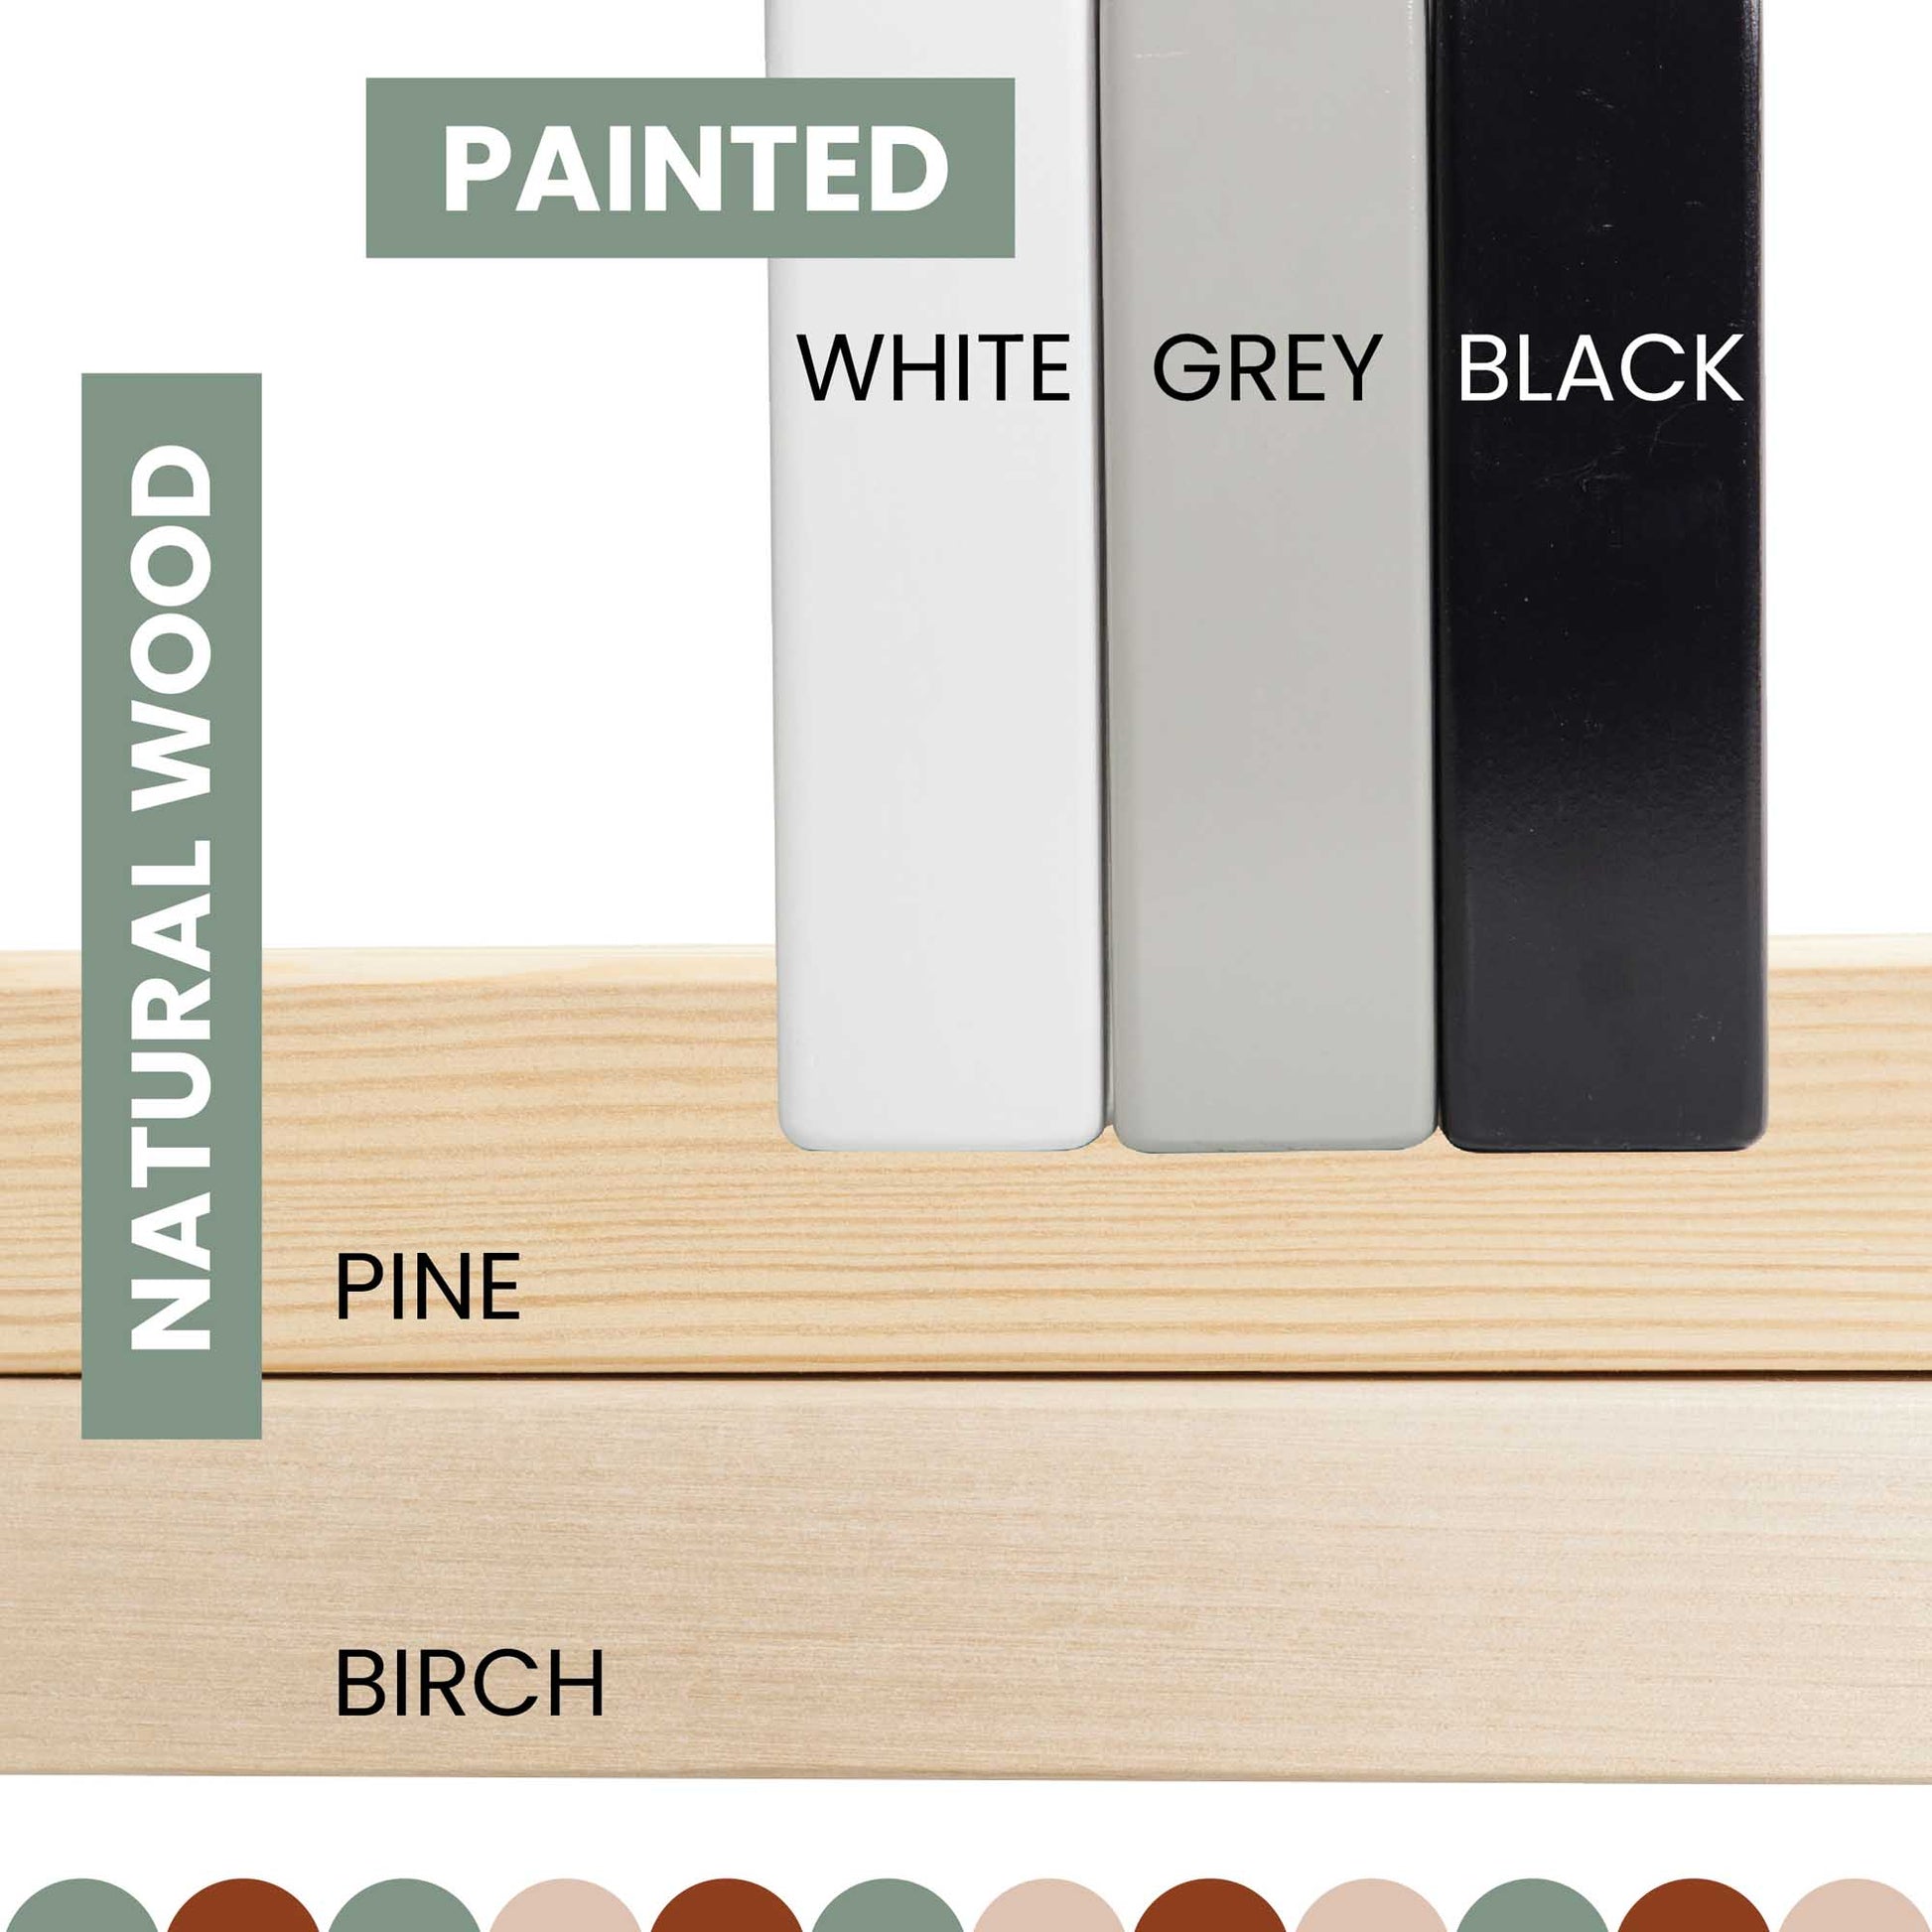 The paint colors for a Kids' house bed on legs with a headboard made of pine, birch, and white.